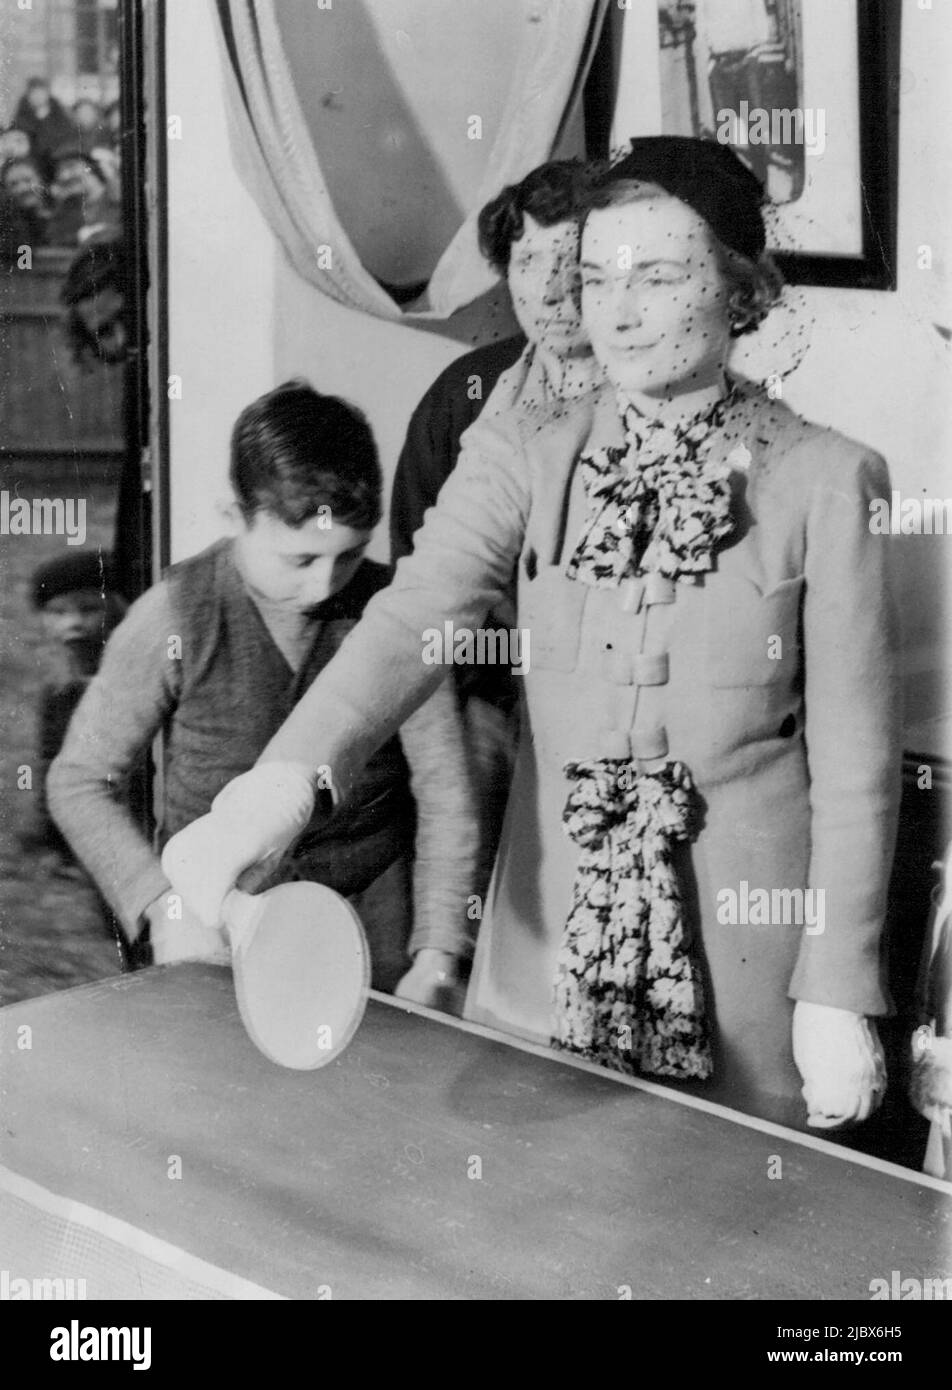 Duchess Of Gloucester Plays Ping Pong: The Duchess of Gloucester playing ping pong, in one of the new flats. The Duchess of Gloucester this afternoon opened 36 flats and 18 cottages at, Prince Regent-lane, Custom House, E., built by the Church Army House Ltd. for rehousing overcrowded families. April 07, 1937. (Photo by Keystone) Stock Photo